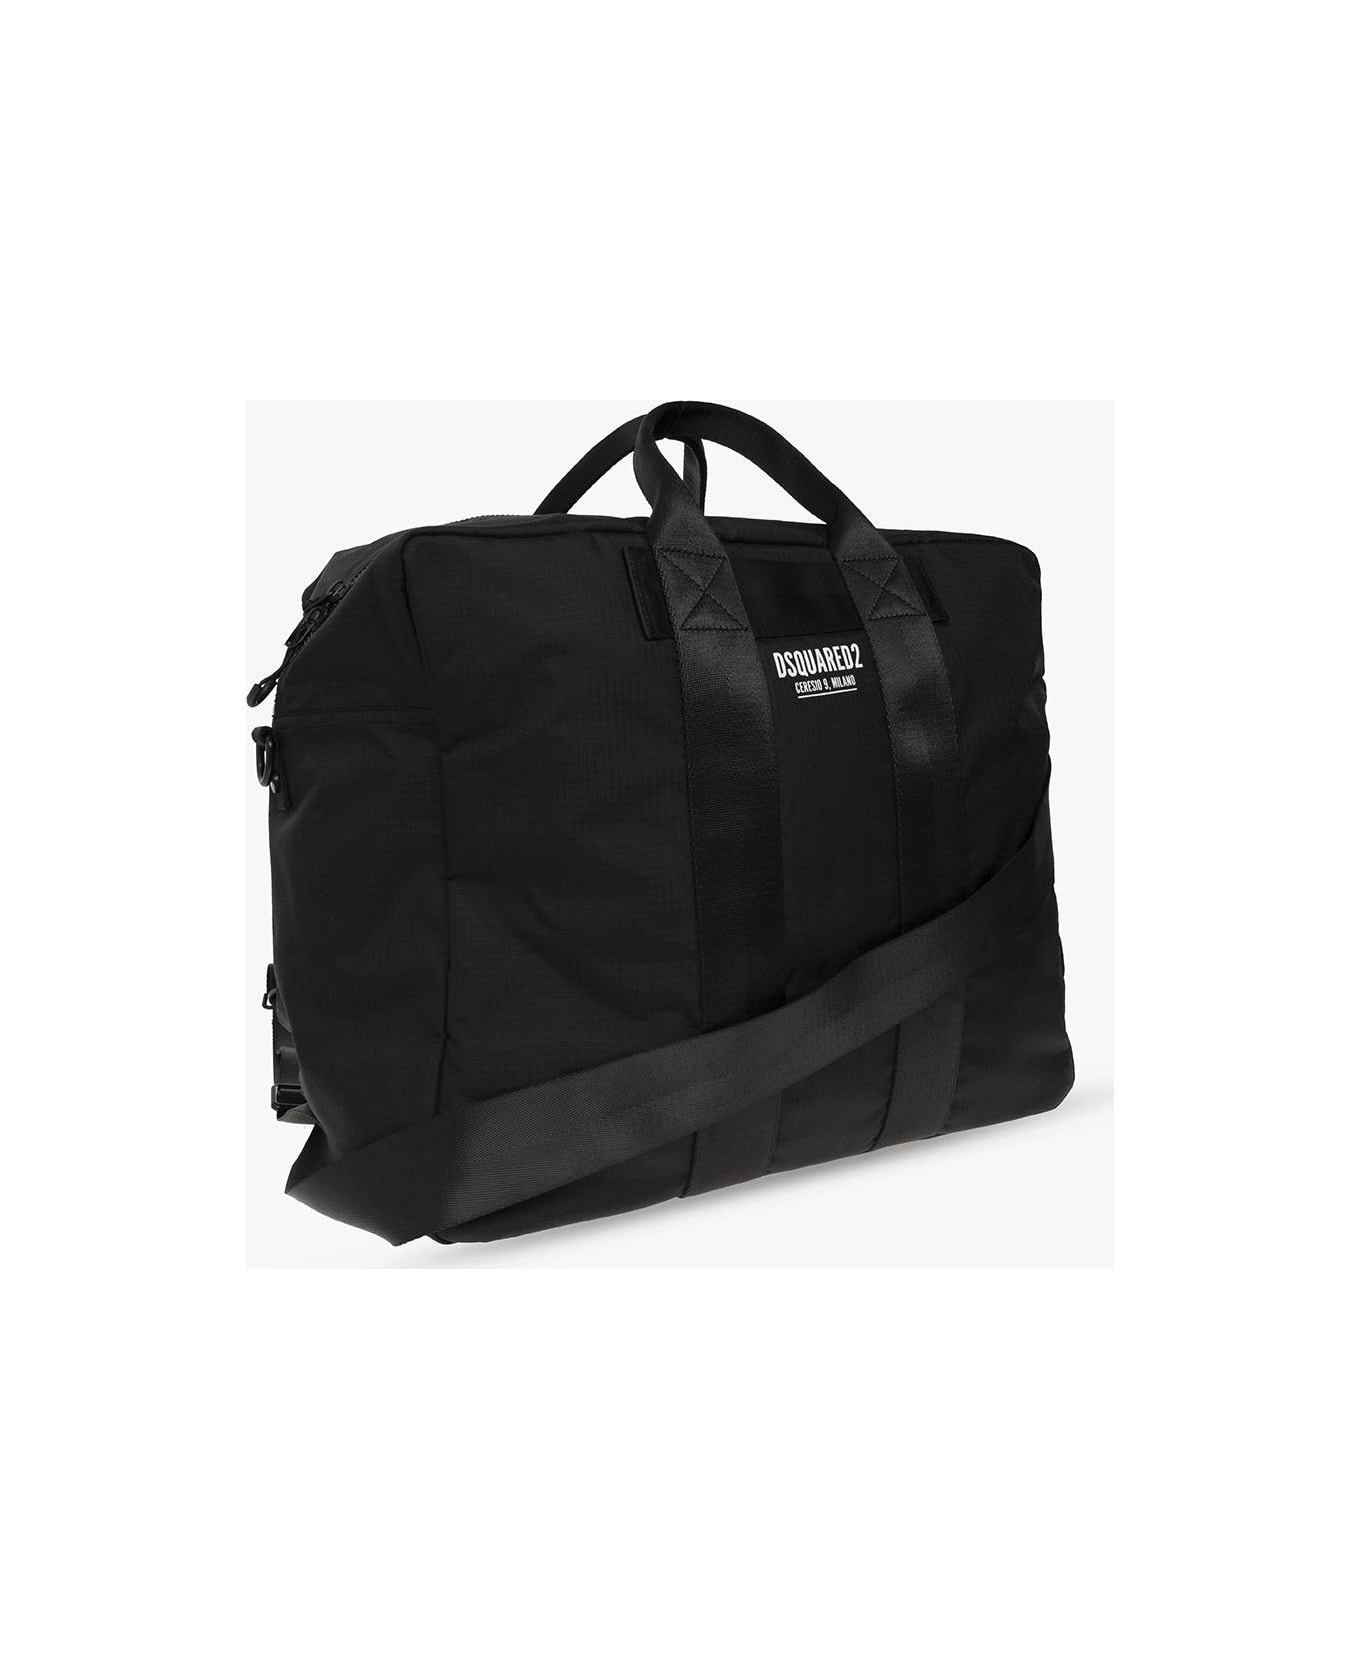 Dsquared2 Duffel Bag With Logo - Black